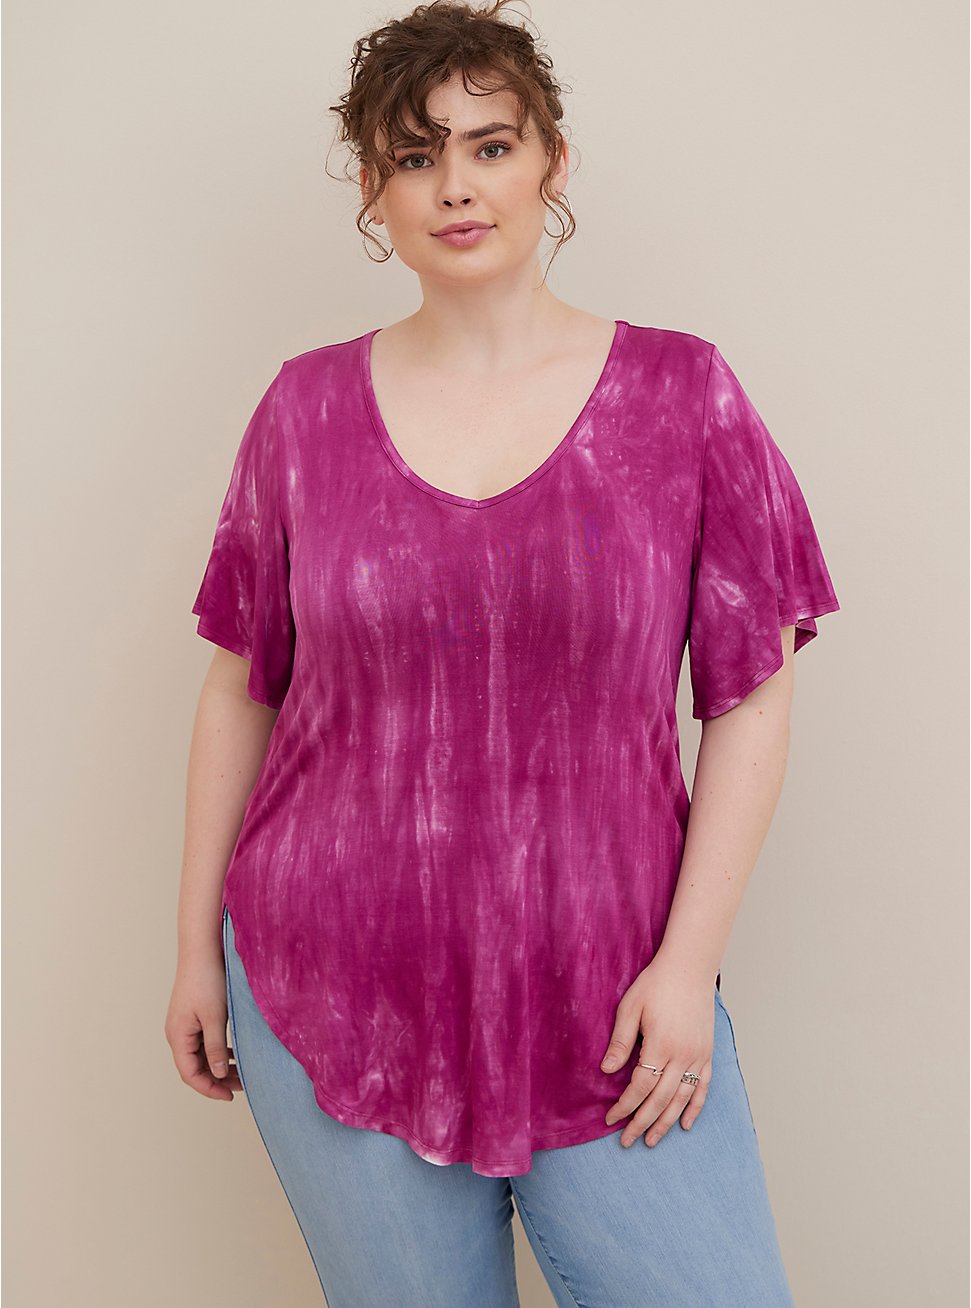 Plus Size Bell Sleeve Favorite Tee - Super Soft Tie-Dye Pink, OTHER PRINTS, hi-res